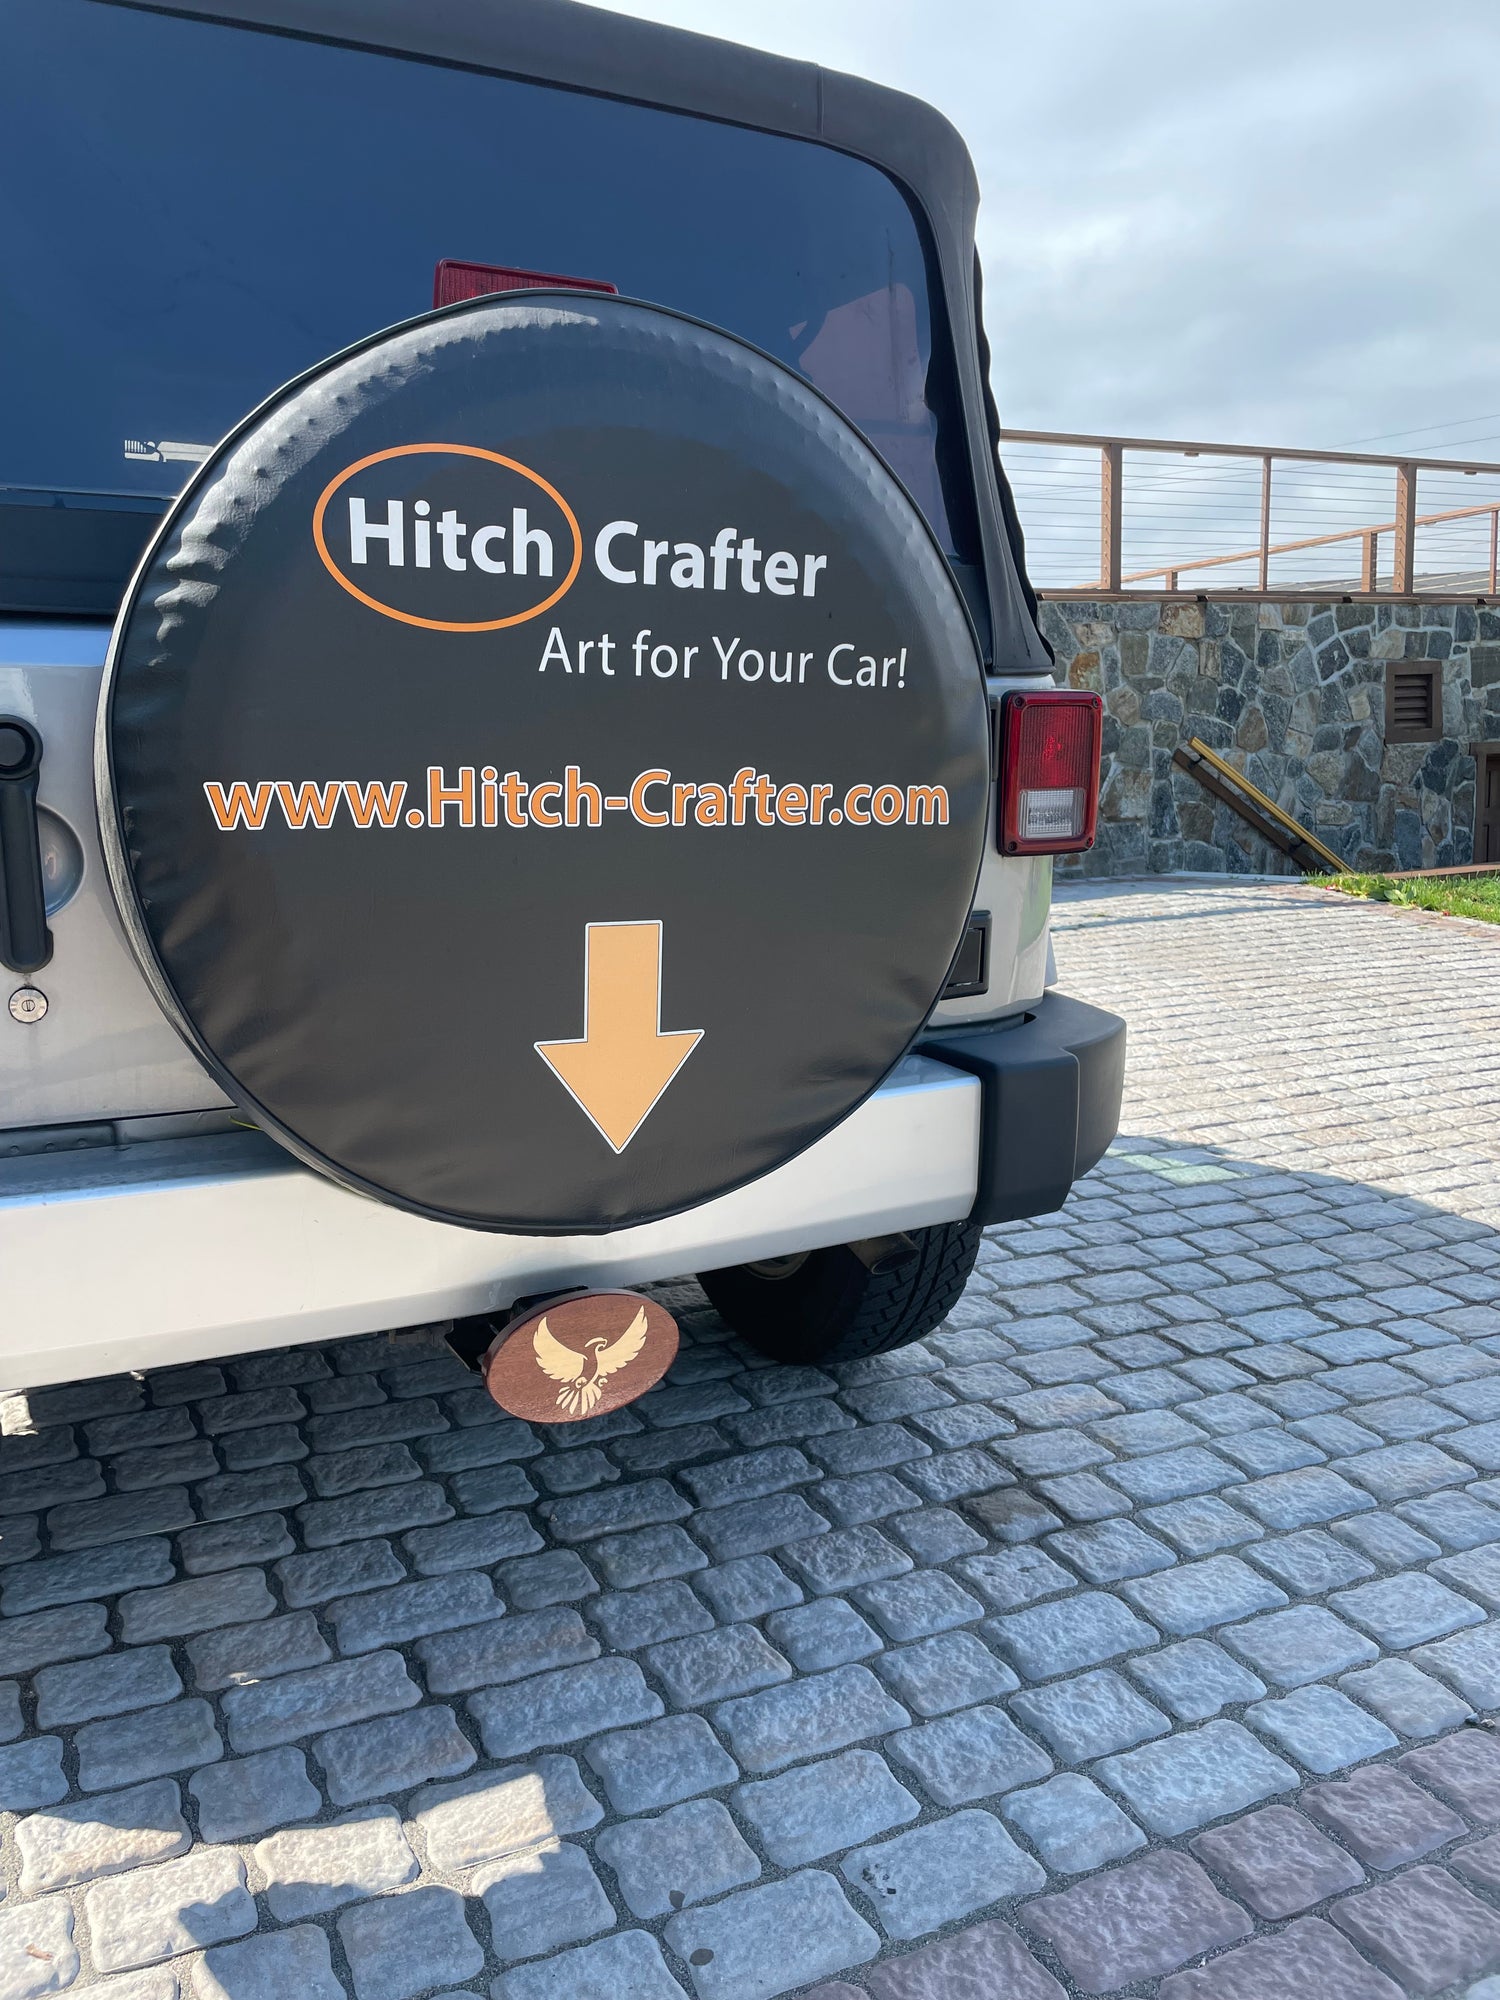 Hitch-Crafter Collection